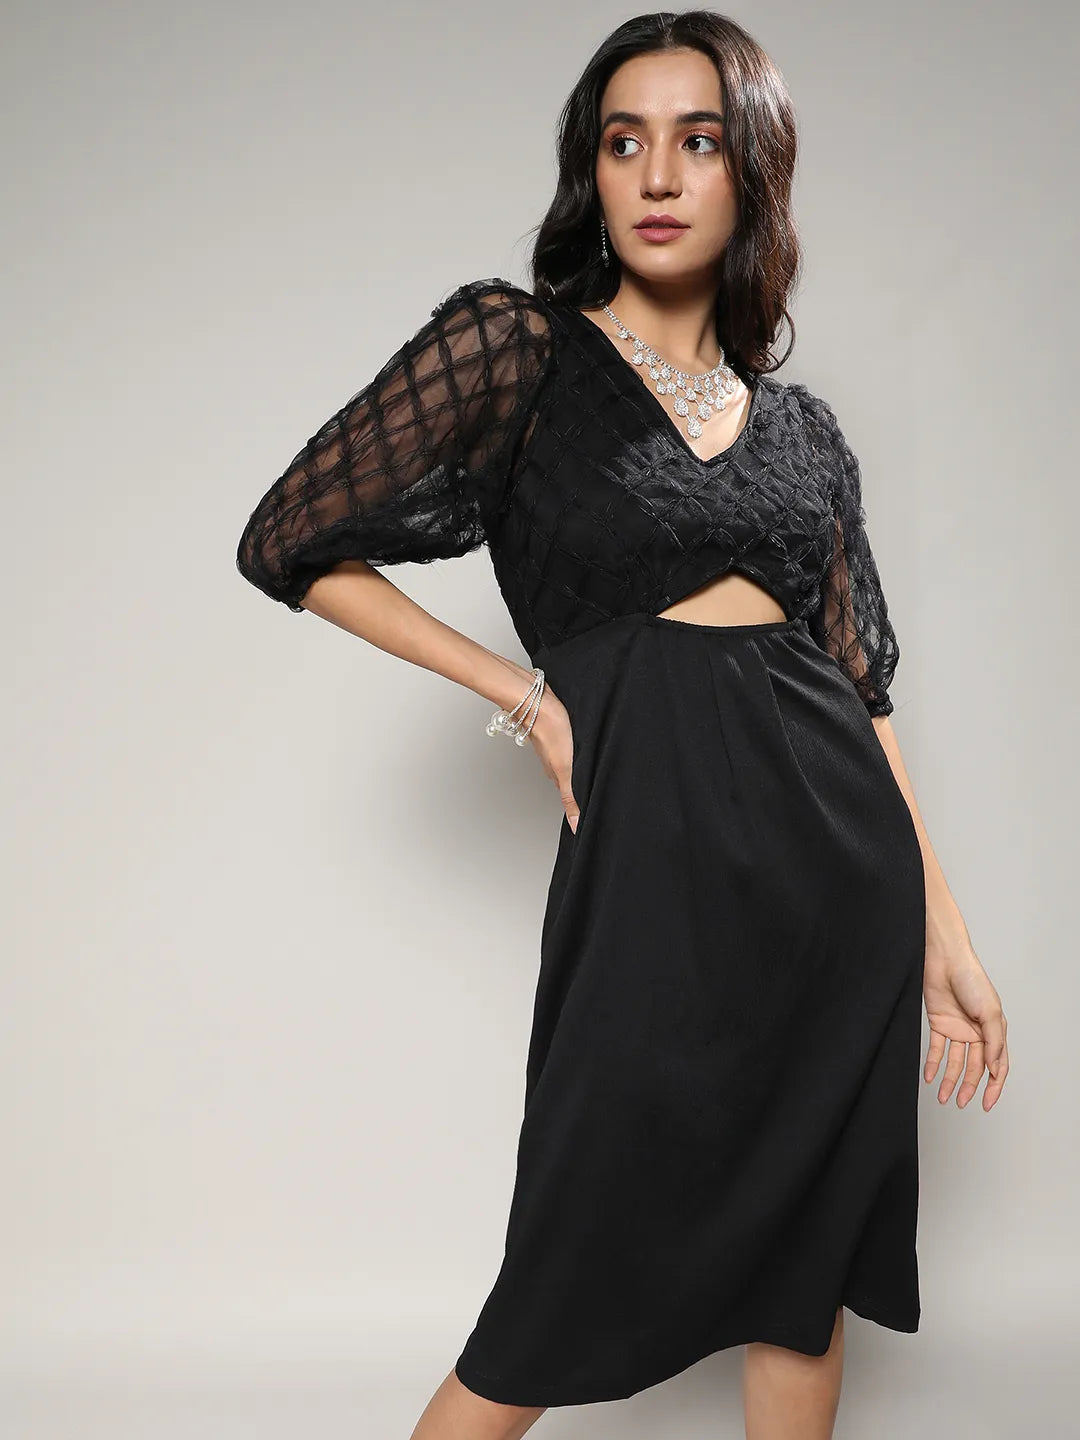 Cut-Out Dress With Sheer Detail